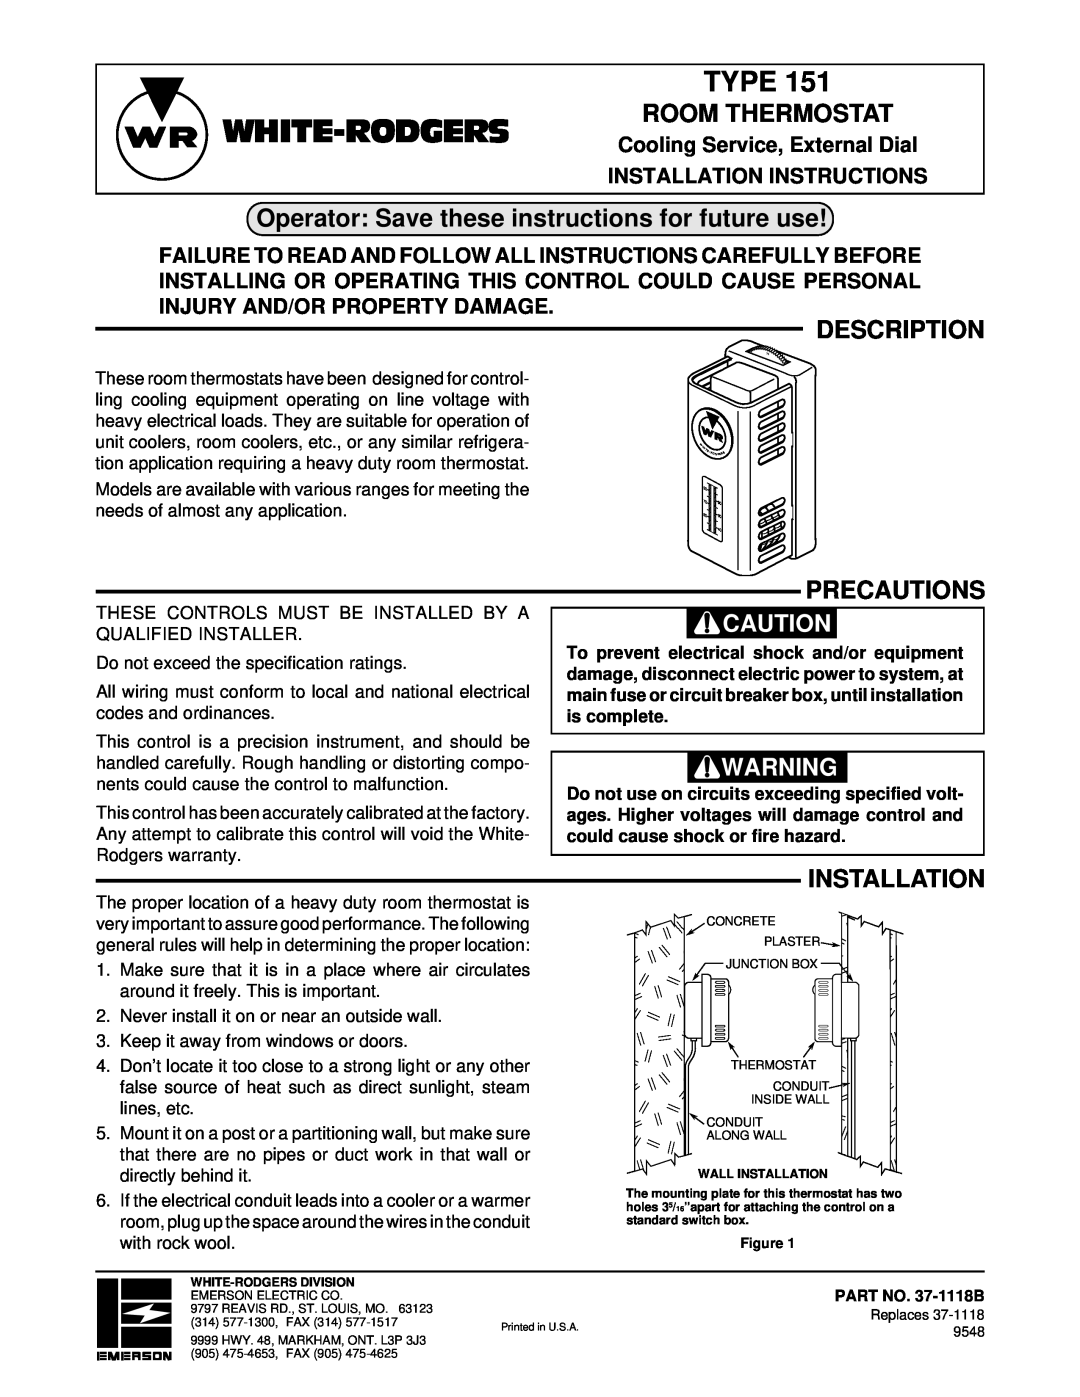 White Rodgers TYPE 151 installation instructions White-Rodgers, Type, Room Thermostat, Description, Precautions 